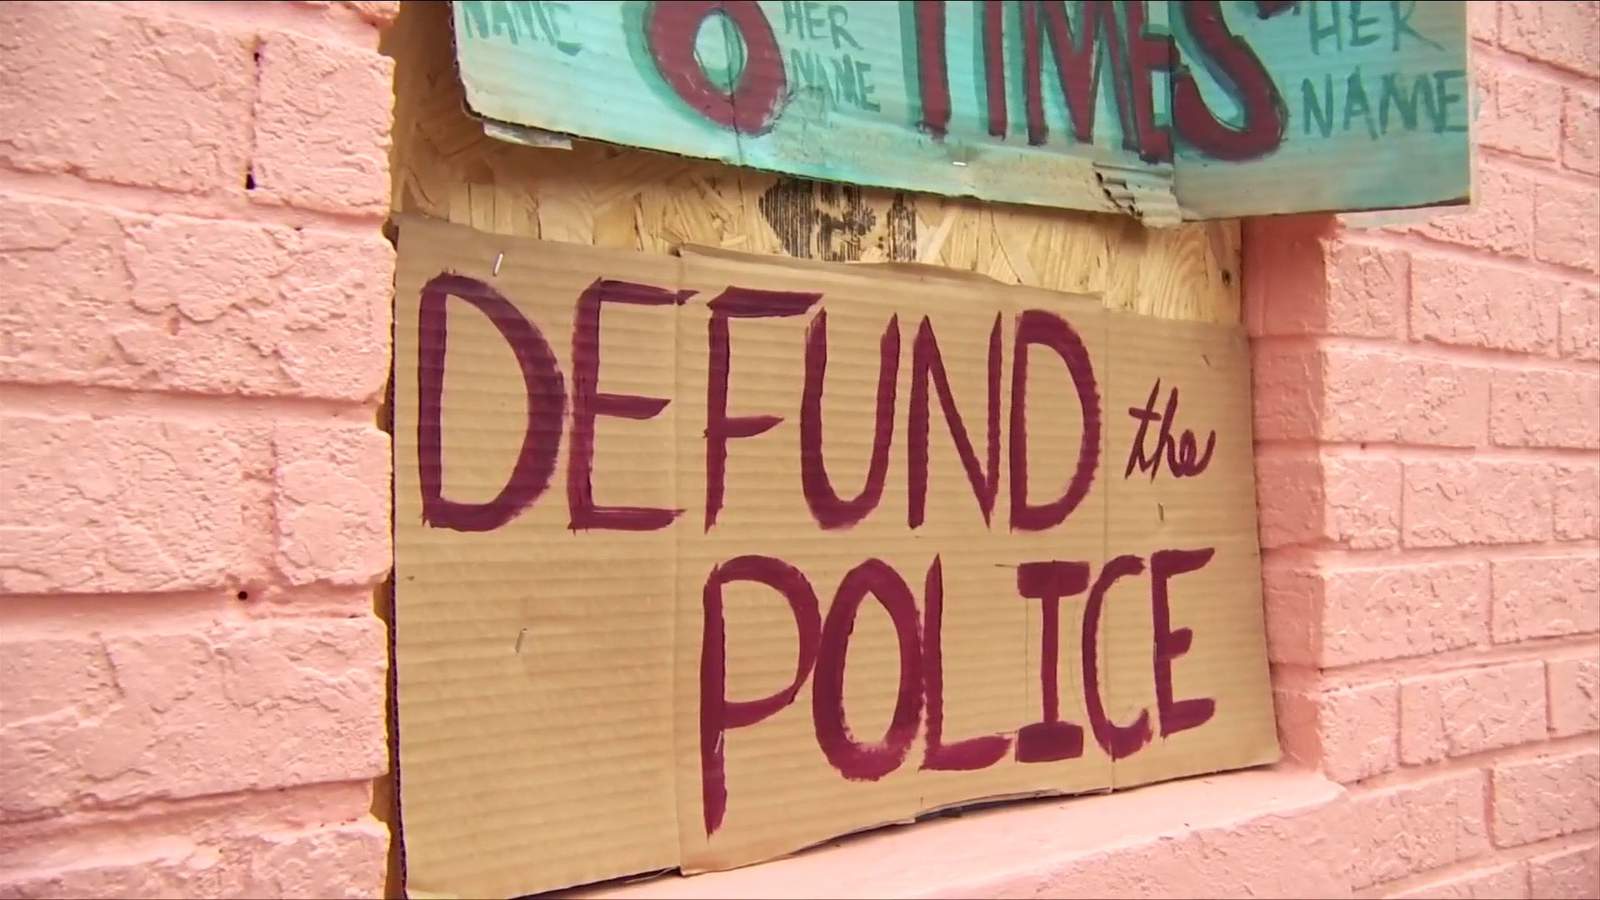 Defund or disband police? Heres the difference